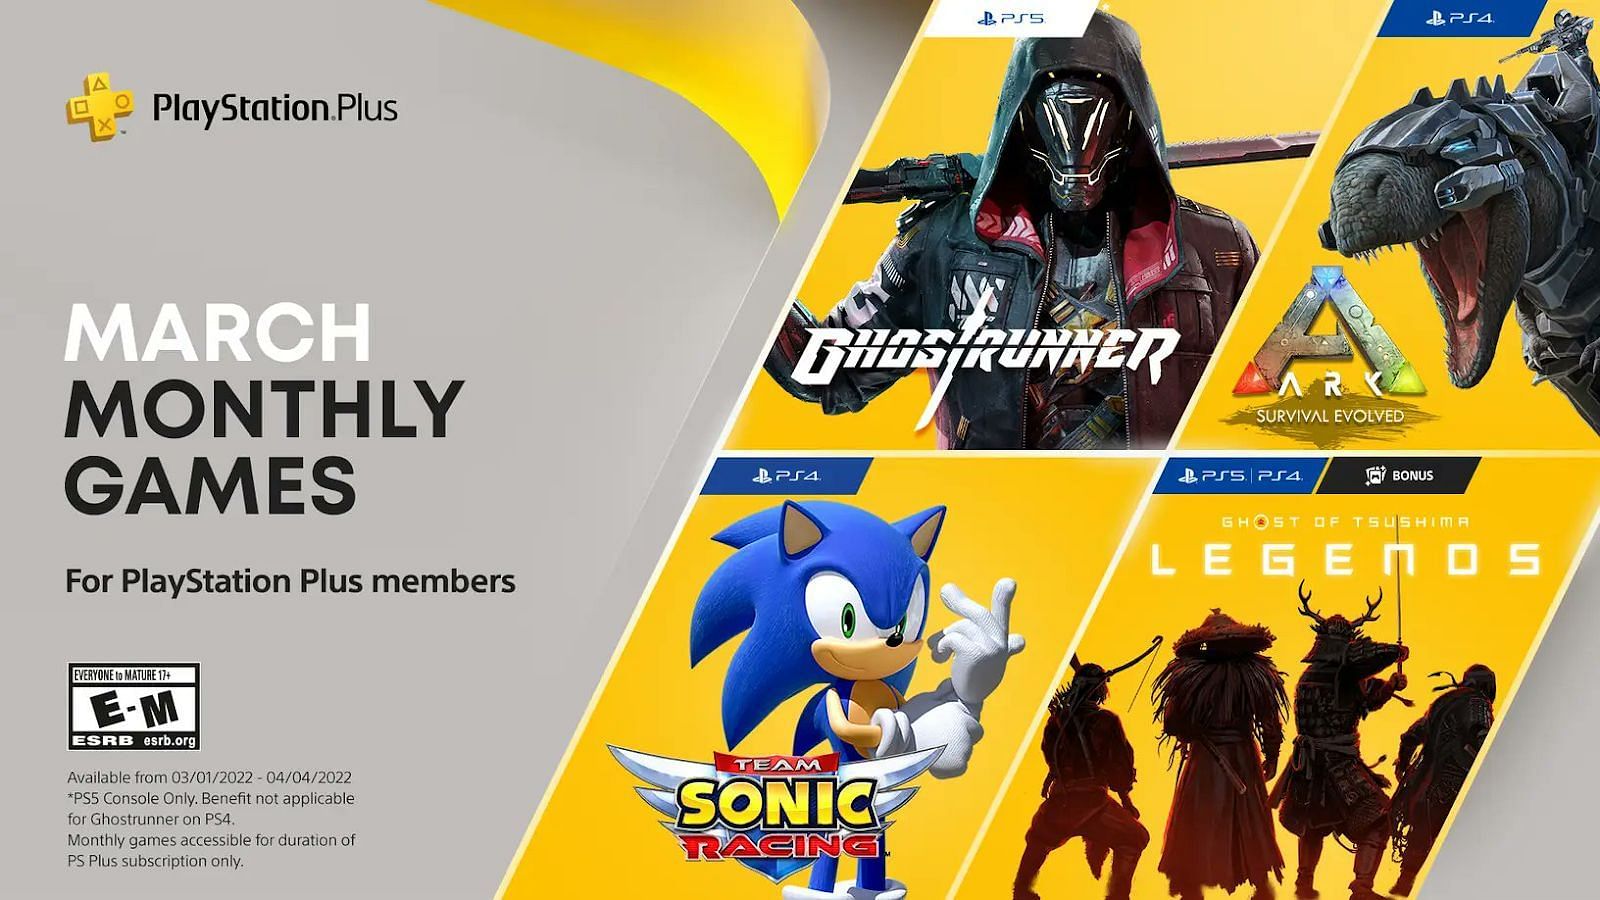 PS Plus March 2022 includes Ghostrunner, Ark Survival Evolved, Team Sonic Racing, and Ghost of Tsushima Legends as a bonus (Image by Sony)